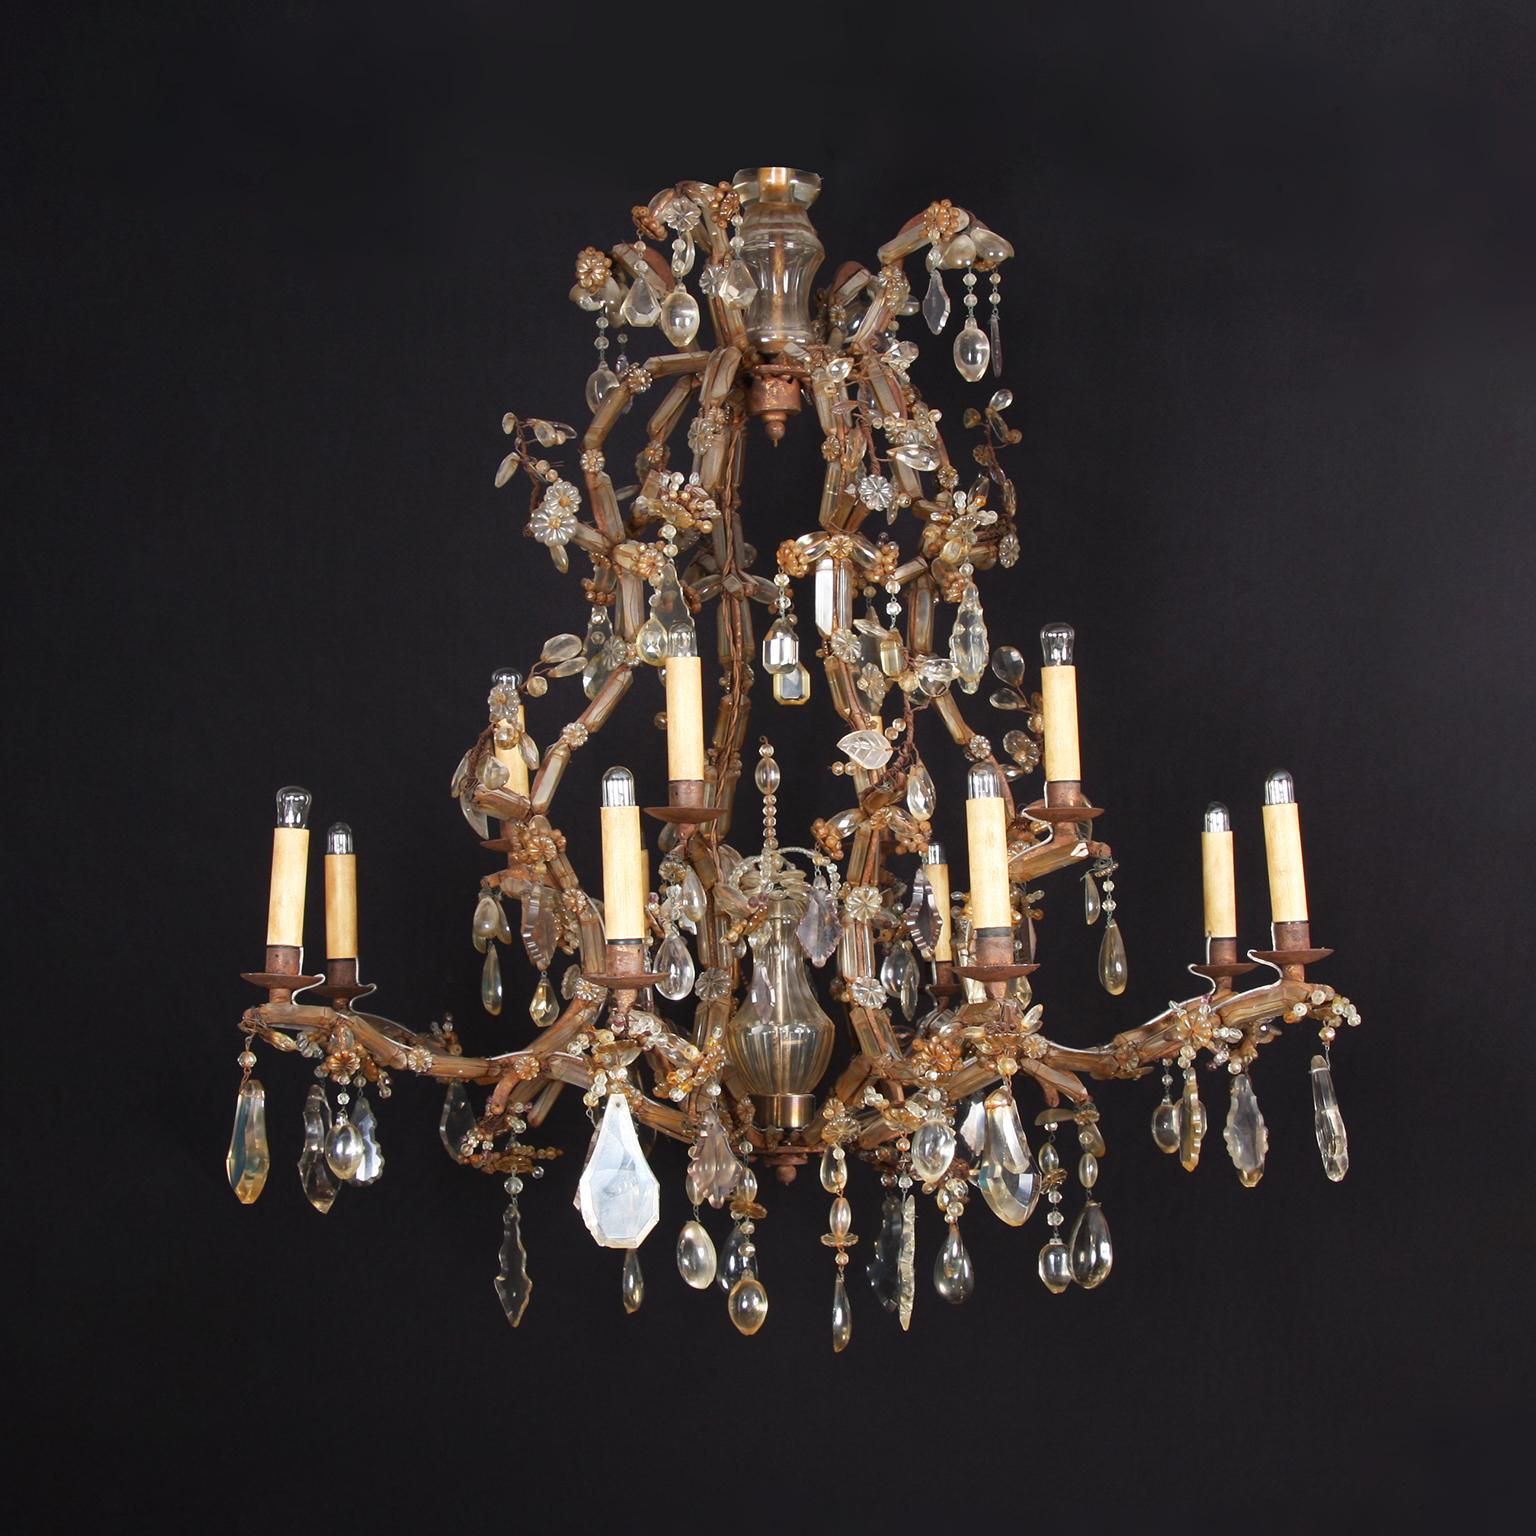 Parisian 19th century

A stunning, early Bagues, chandelier.

With beautiful floral detailing and hanging drops. 

Rewired and pat tested.